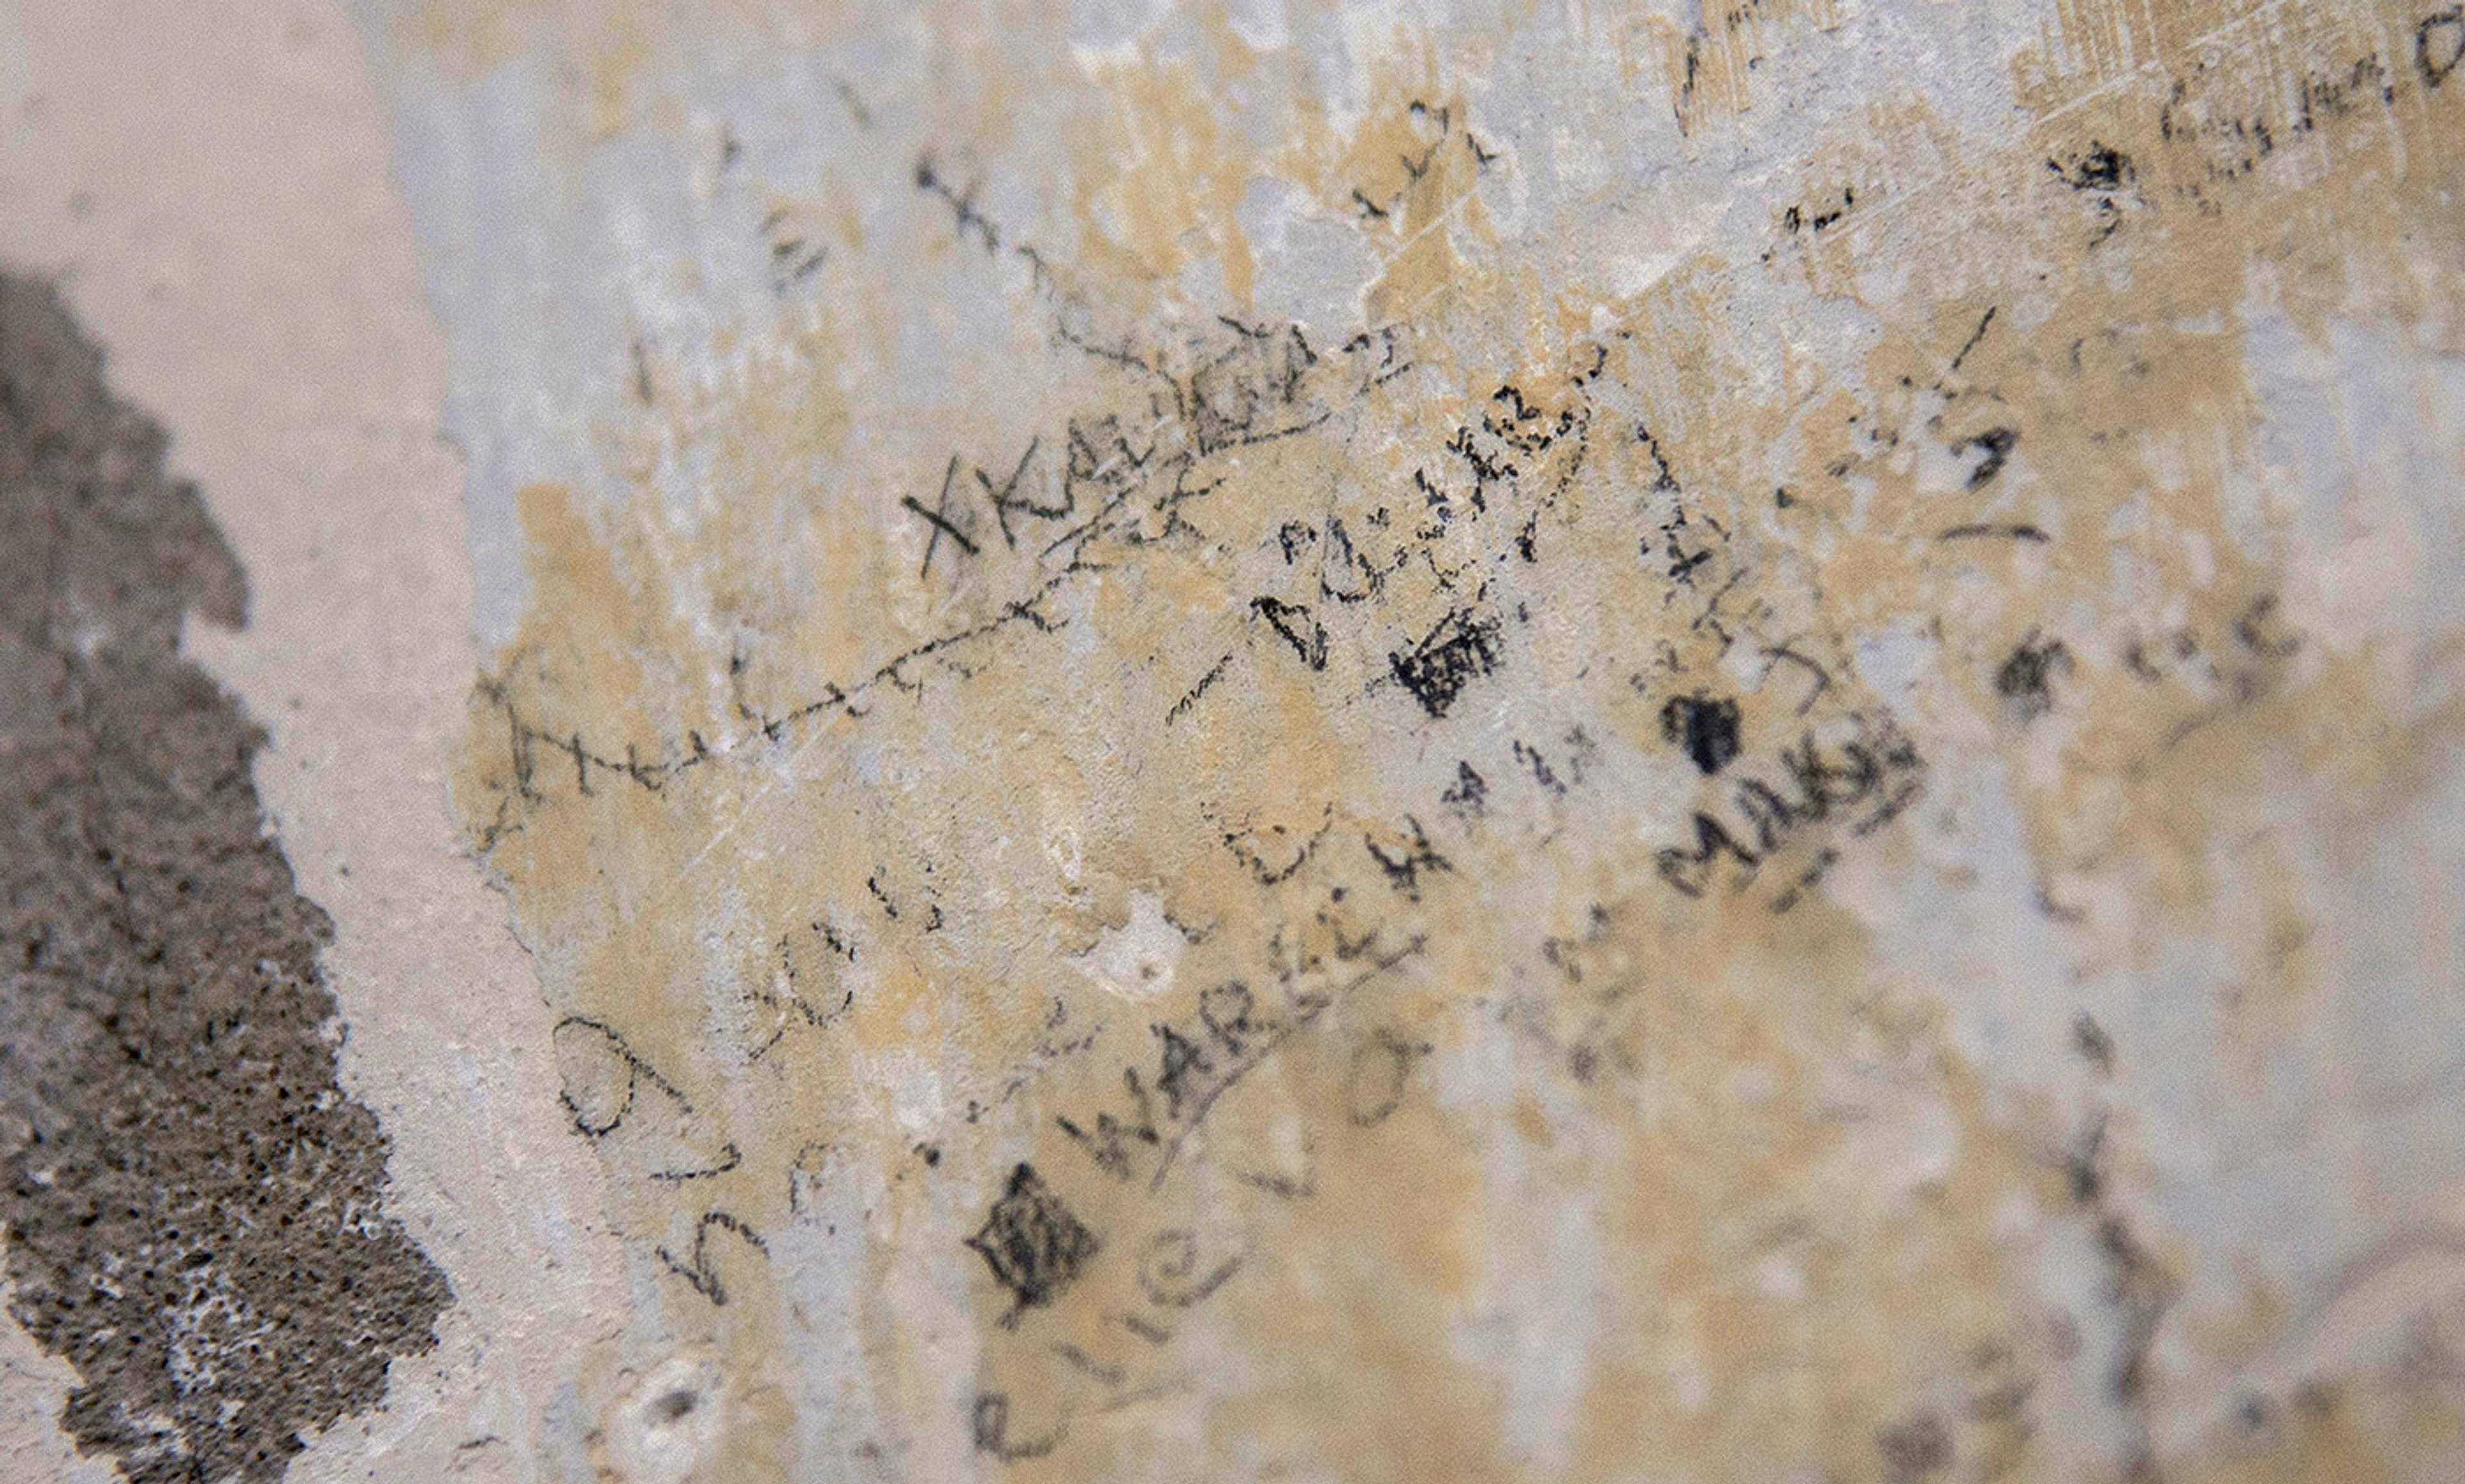 <p>Recently discovered prisoner writings on the wall of Lyon’s notorious Montluc prison from which <em>résistant</em> and historian Marc Bloch was taken and executed by the Nazis on the night of the 16 June 1944. A noted historian, Bloch wrote: ‘The task of the historian is understanding, not judging.’ <em>Photo by Bony/AP/Rex</em></p>